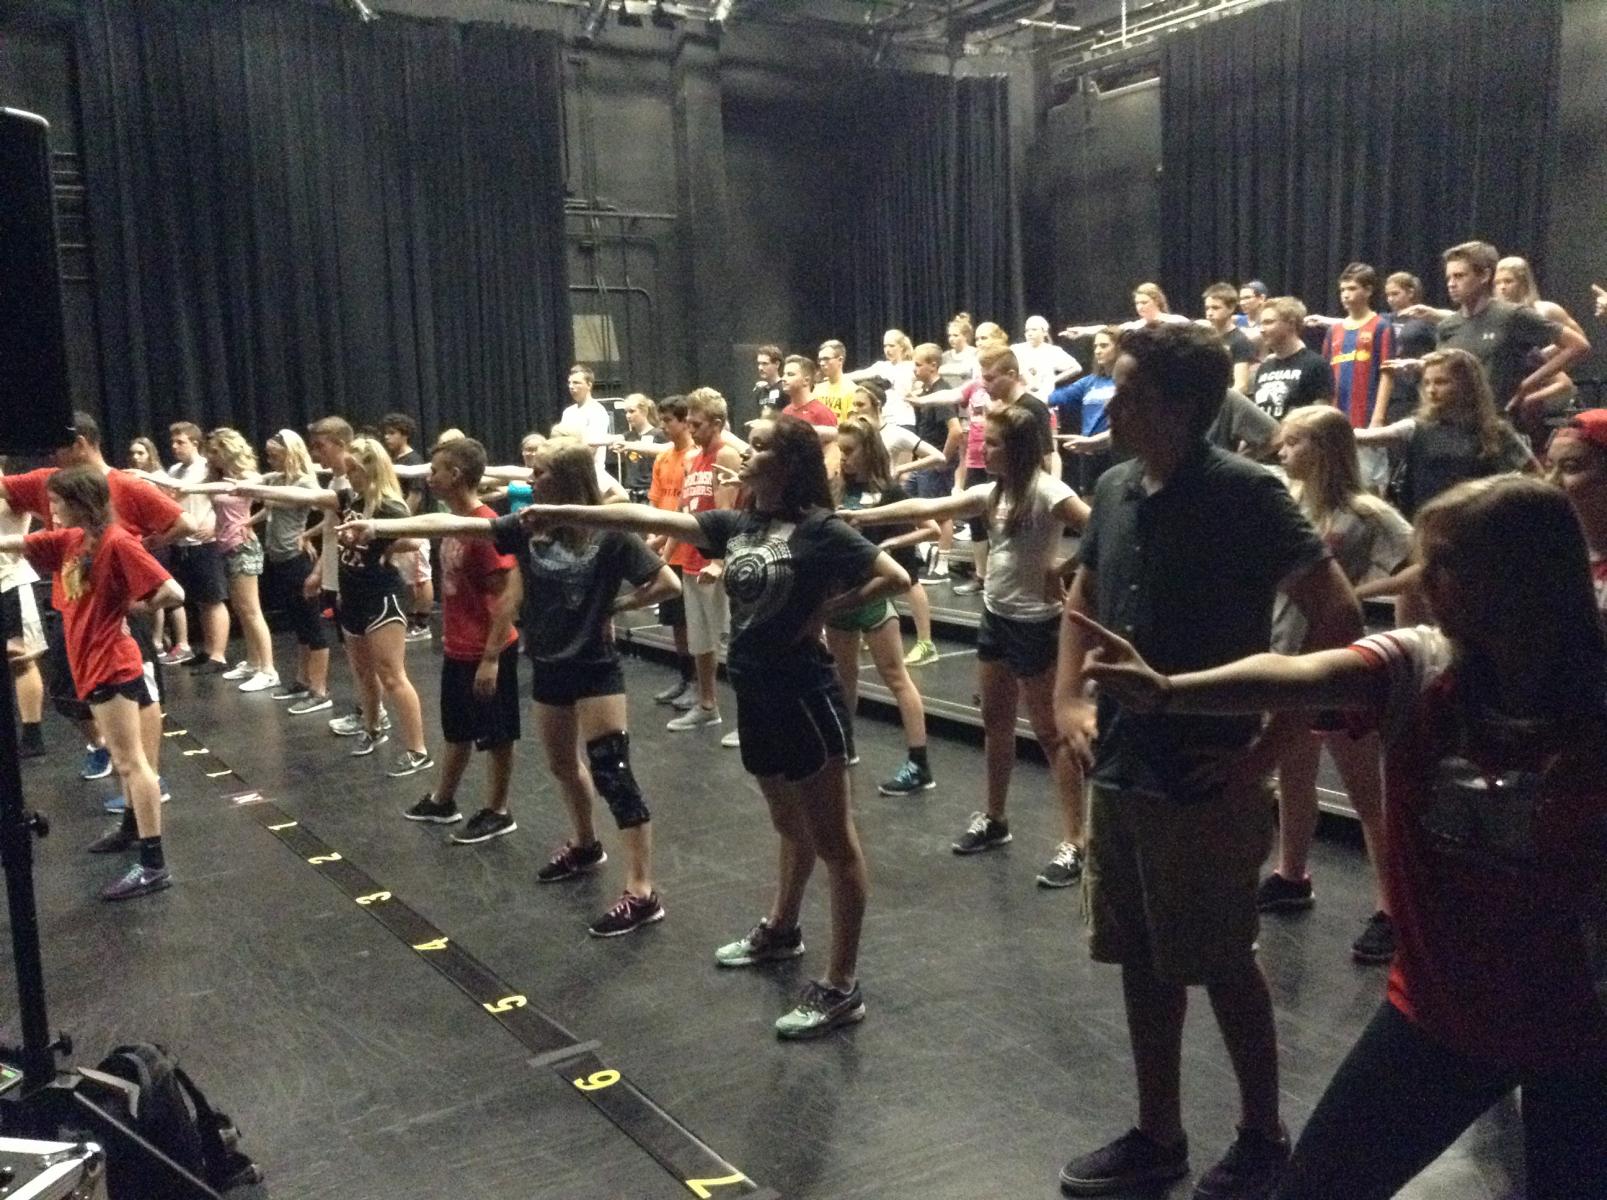 Show Choir students in rehearsal at the Studio Theatre